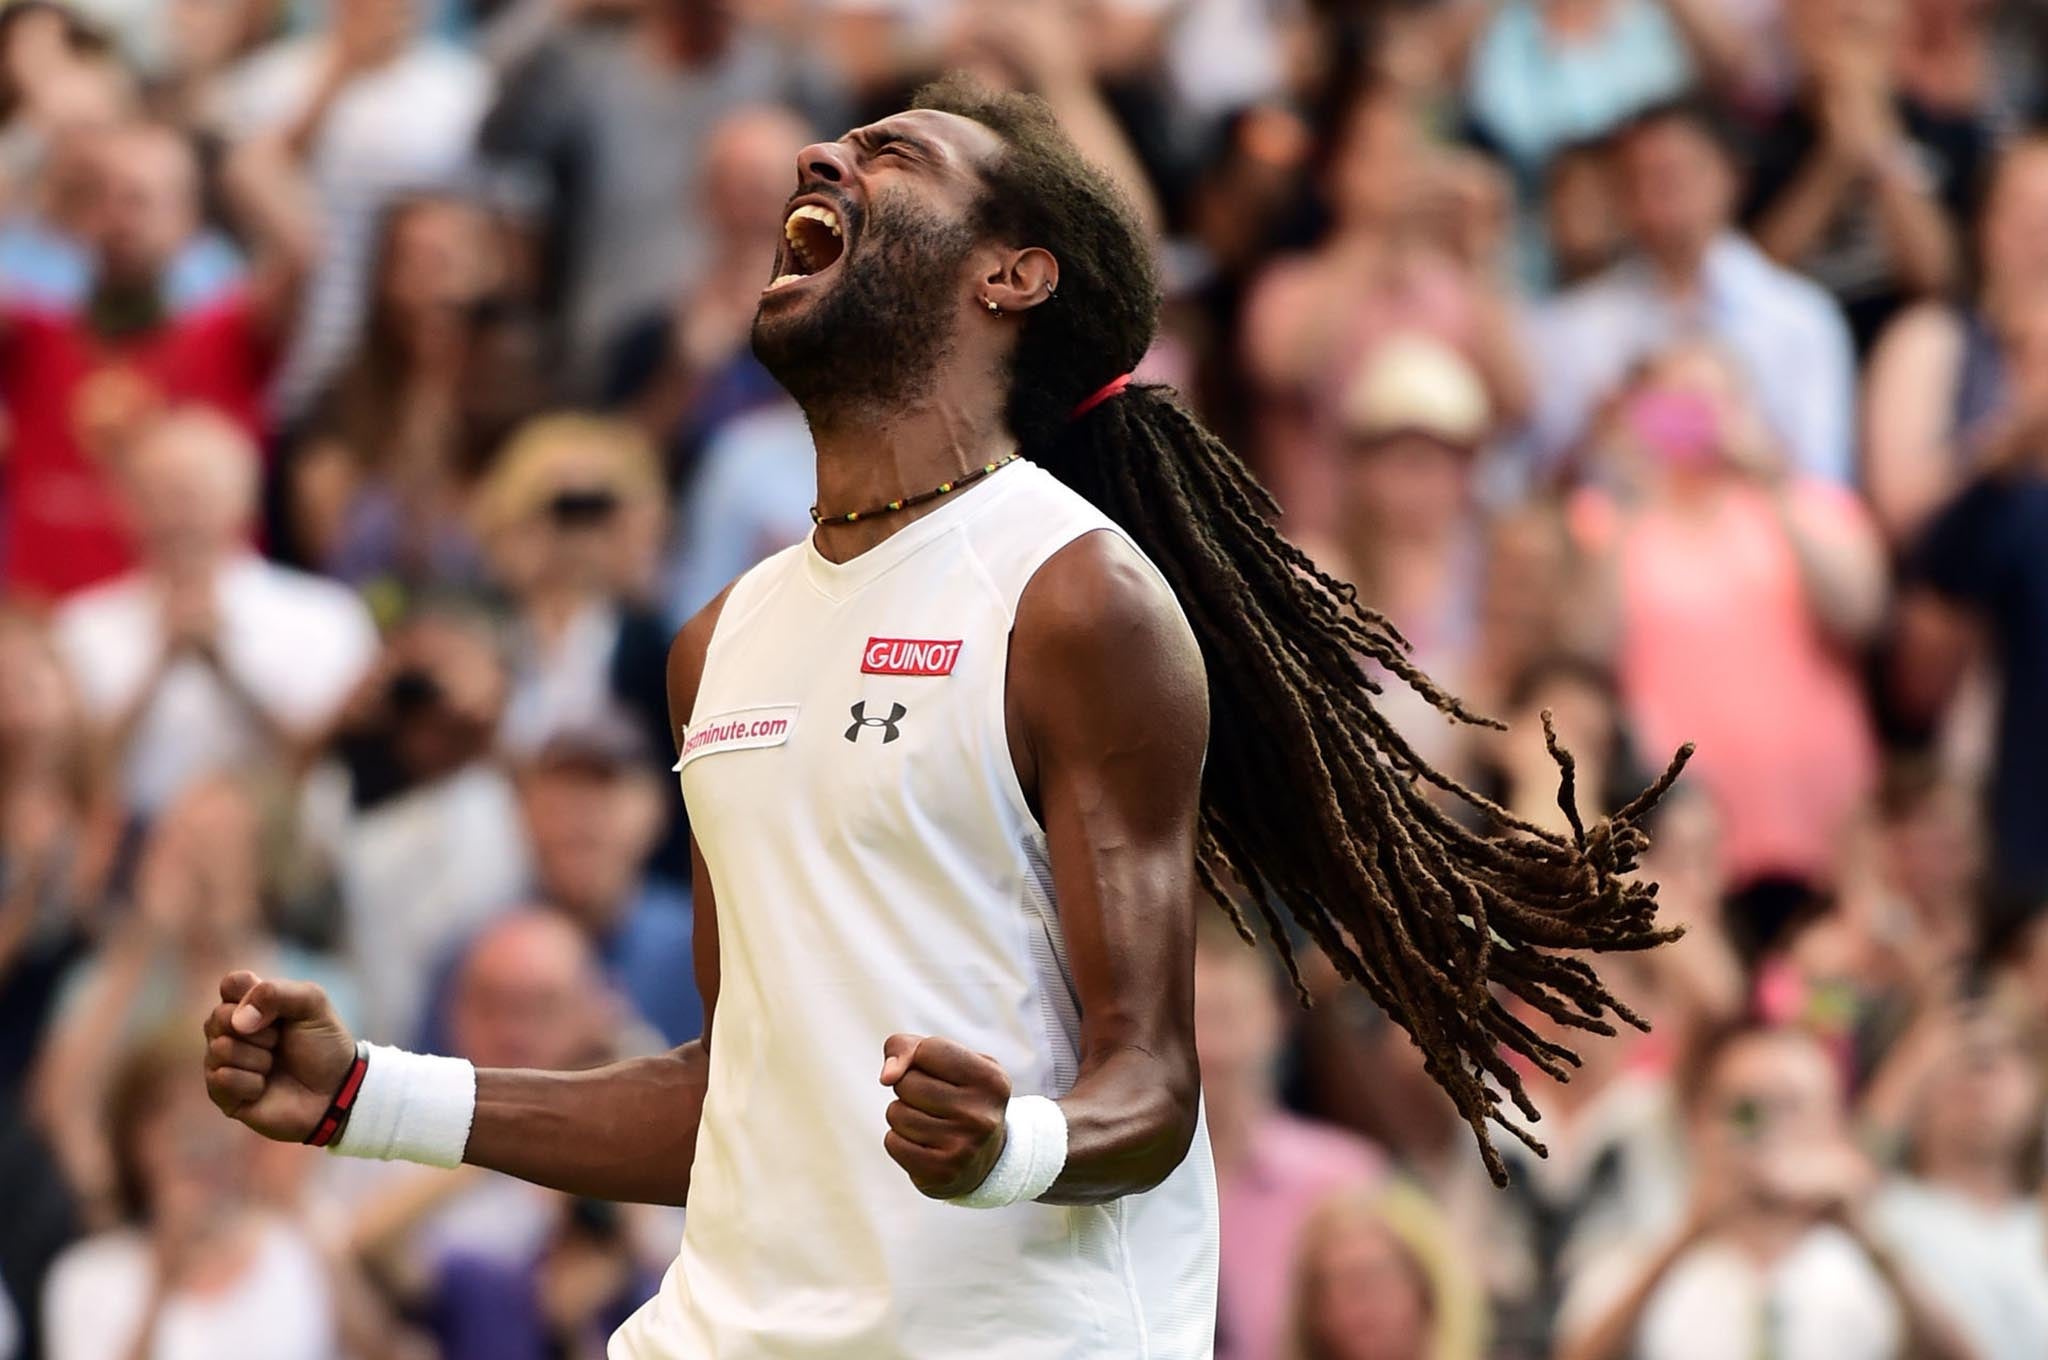 Dustin Brown celebrates victory over Rafael Nadal on day Four of the Wimbledon Championships